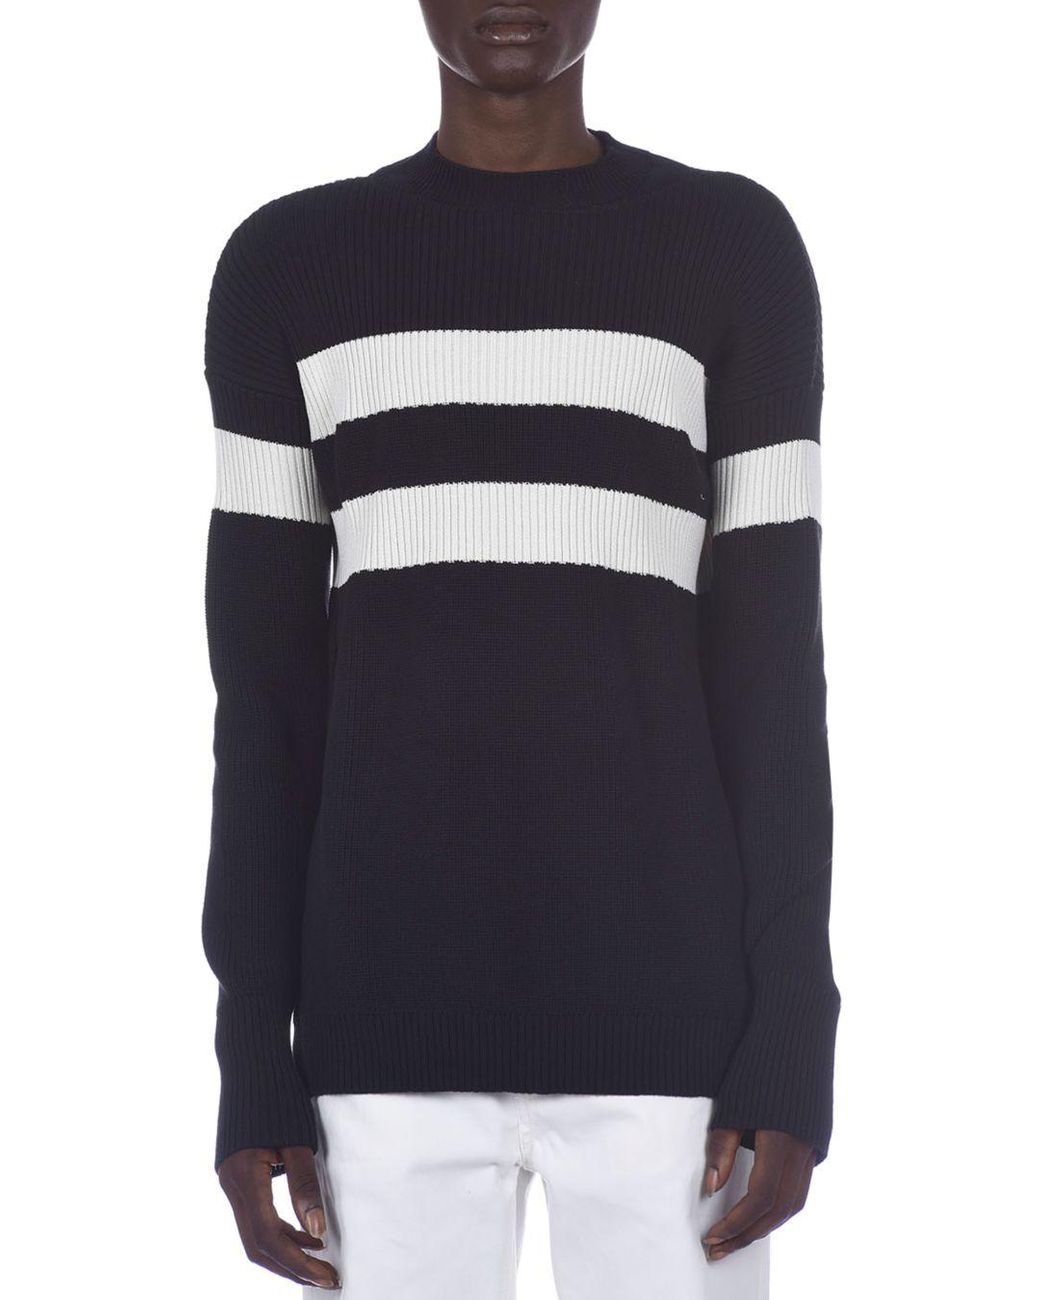 Marni Cotton Chunky Rib Knit Striped Sweater in Black for Men - Lyst